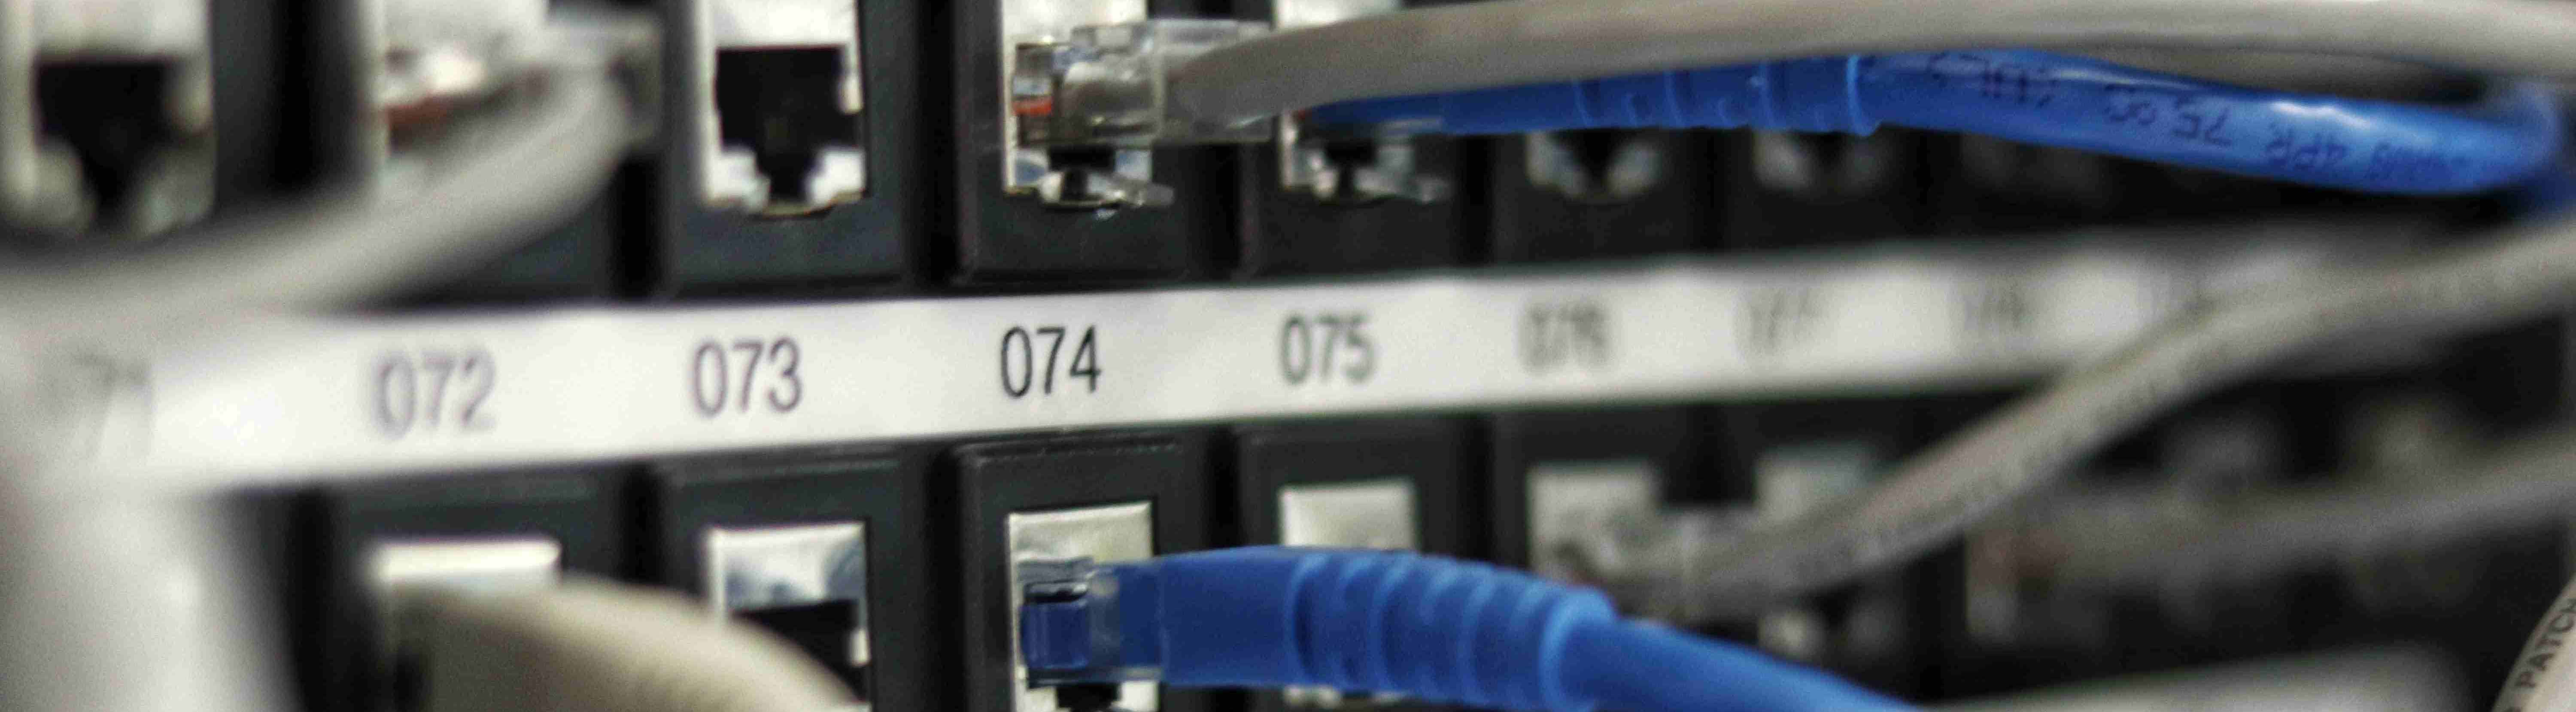 Network patch panel zoomed in on a blue cable plugging into port 074 in between 8 grey cables